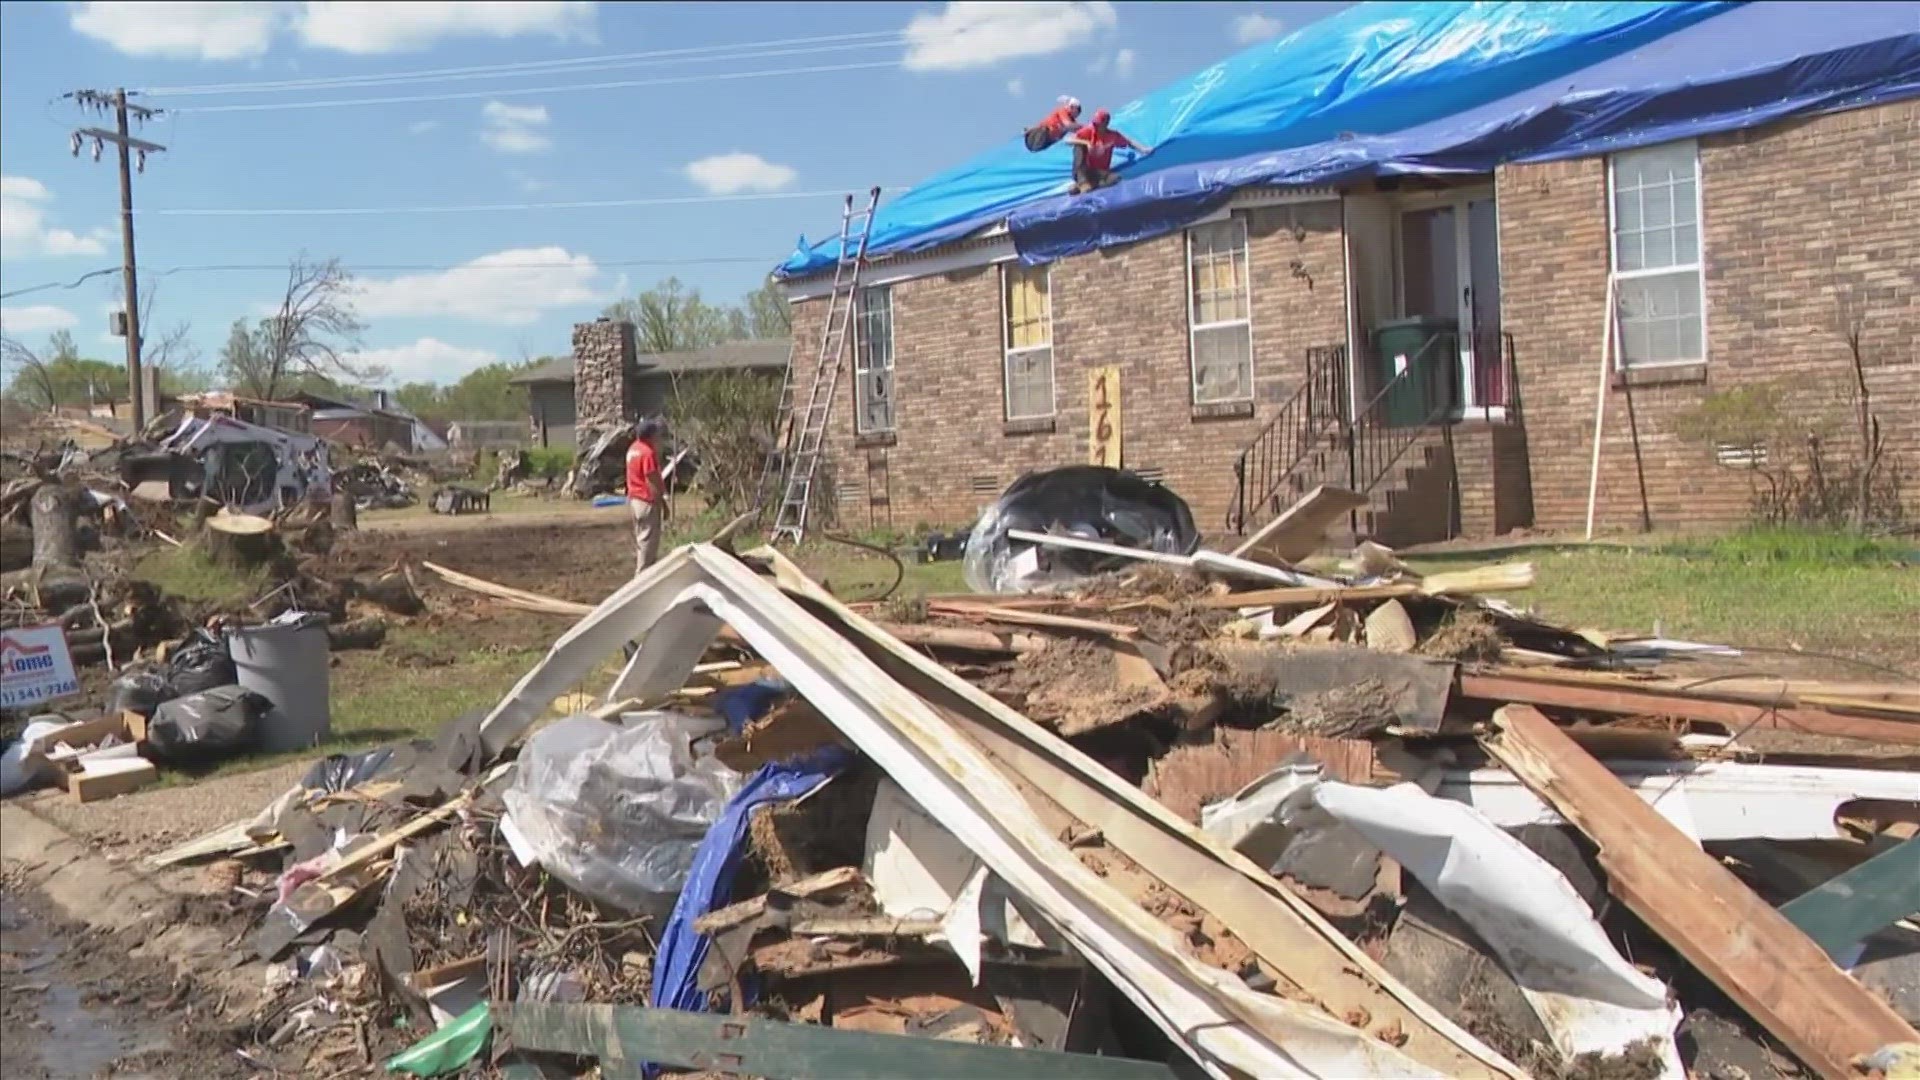 After a string of deadly storms on March 31, the Covington community is still recovering with the help of federal relief and volunteer efforts.